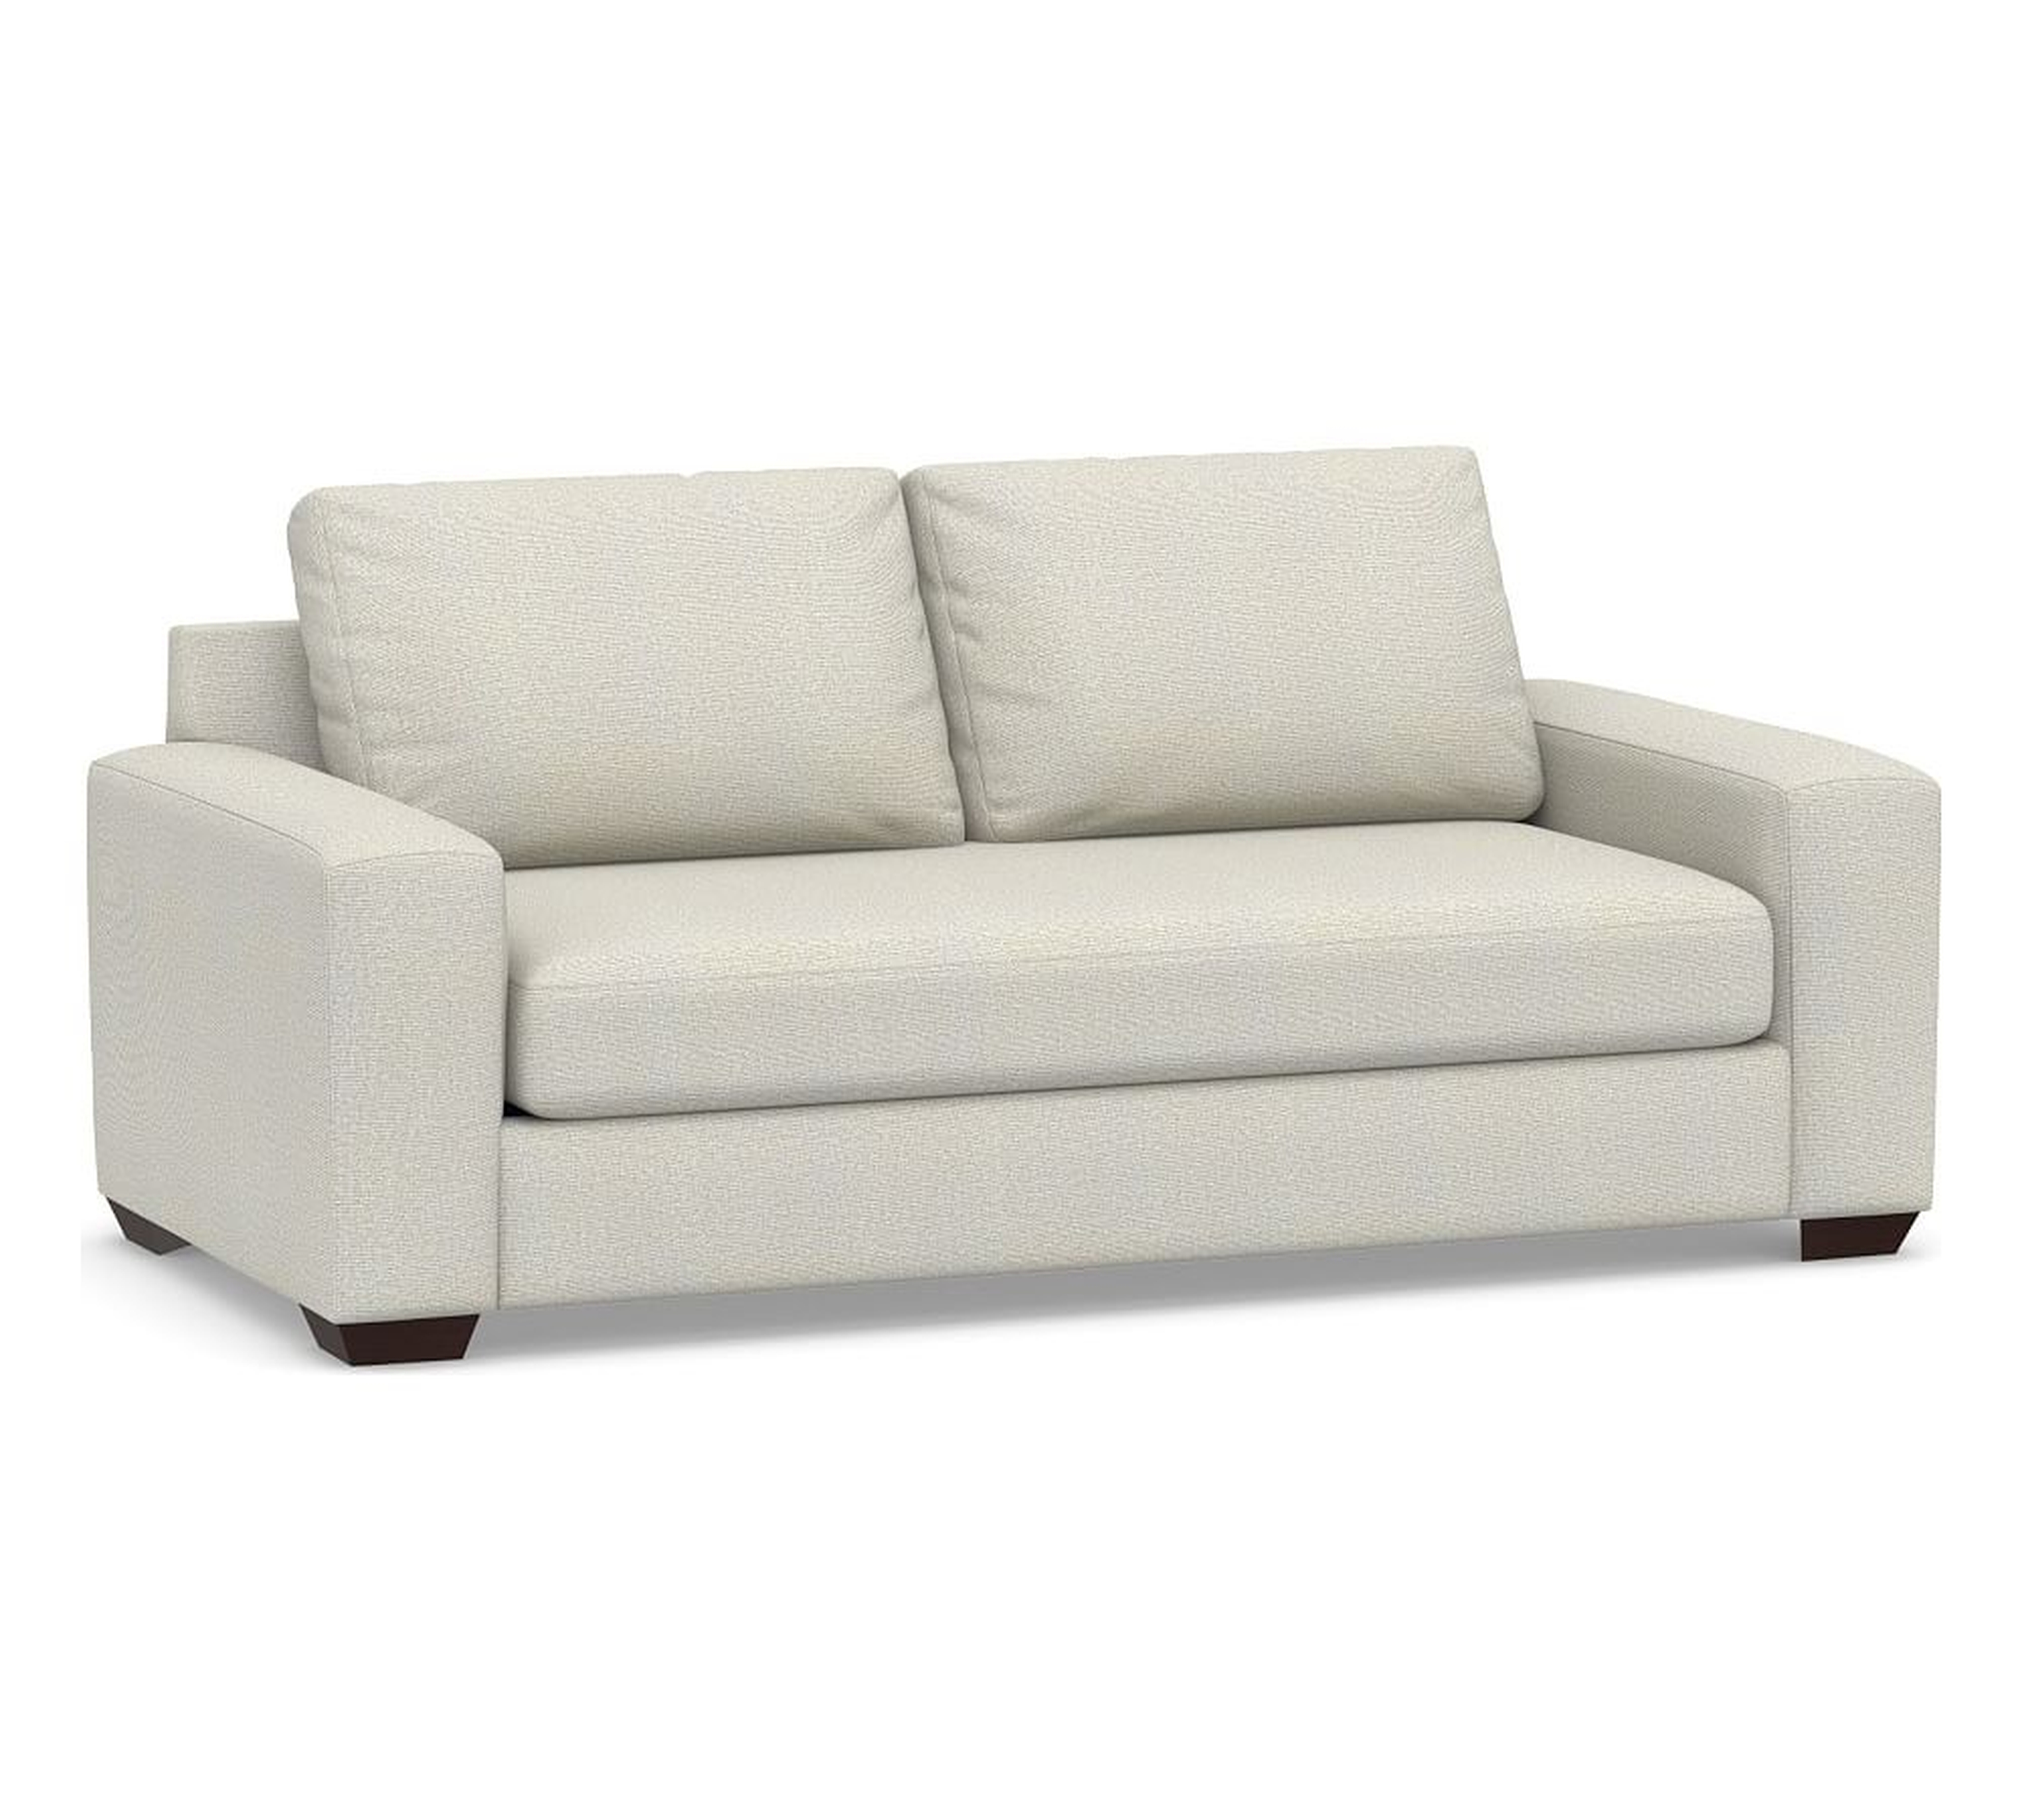 Big Sur Square Arm Upholstered Sofa 82" with Bench Cushion, Down Blend Wrapped Cushions, Performance Heathered Basketweave Dove - Pottery Barn